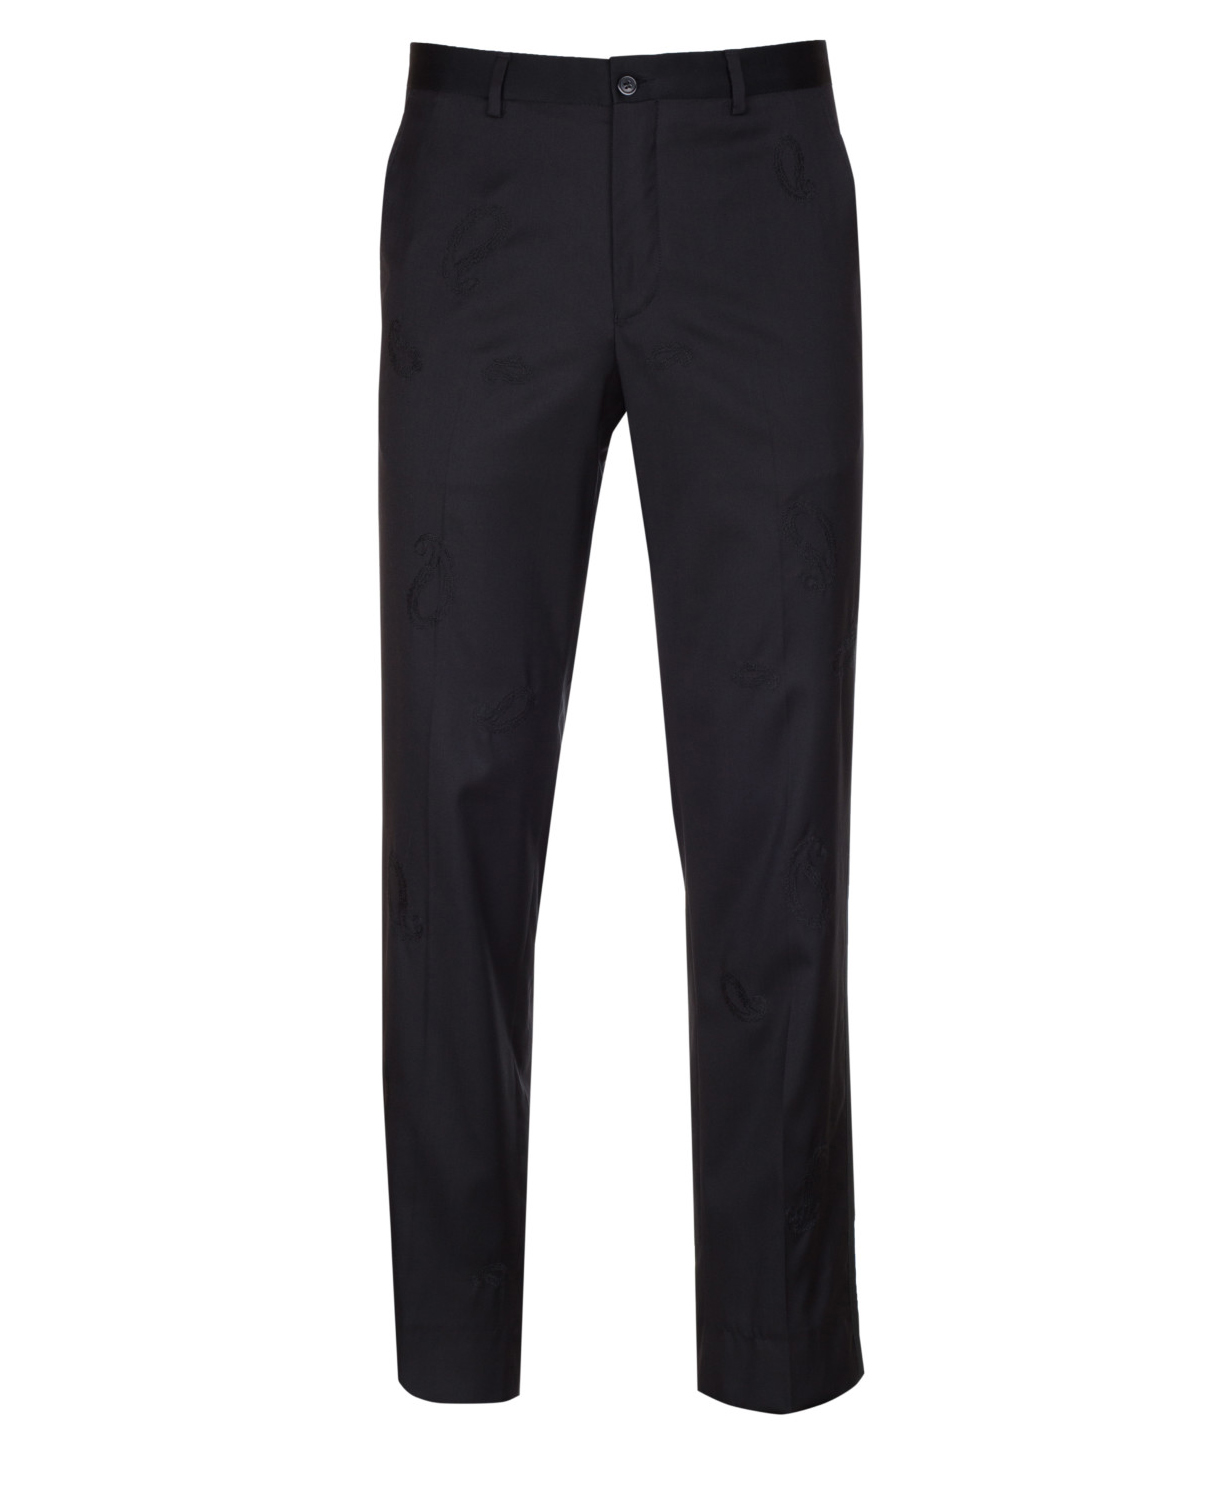 www.couturepoint.com-emporio-armani-mens-black-wool-and-silk-embroidery-dress-pants